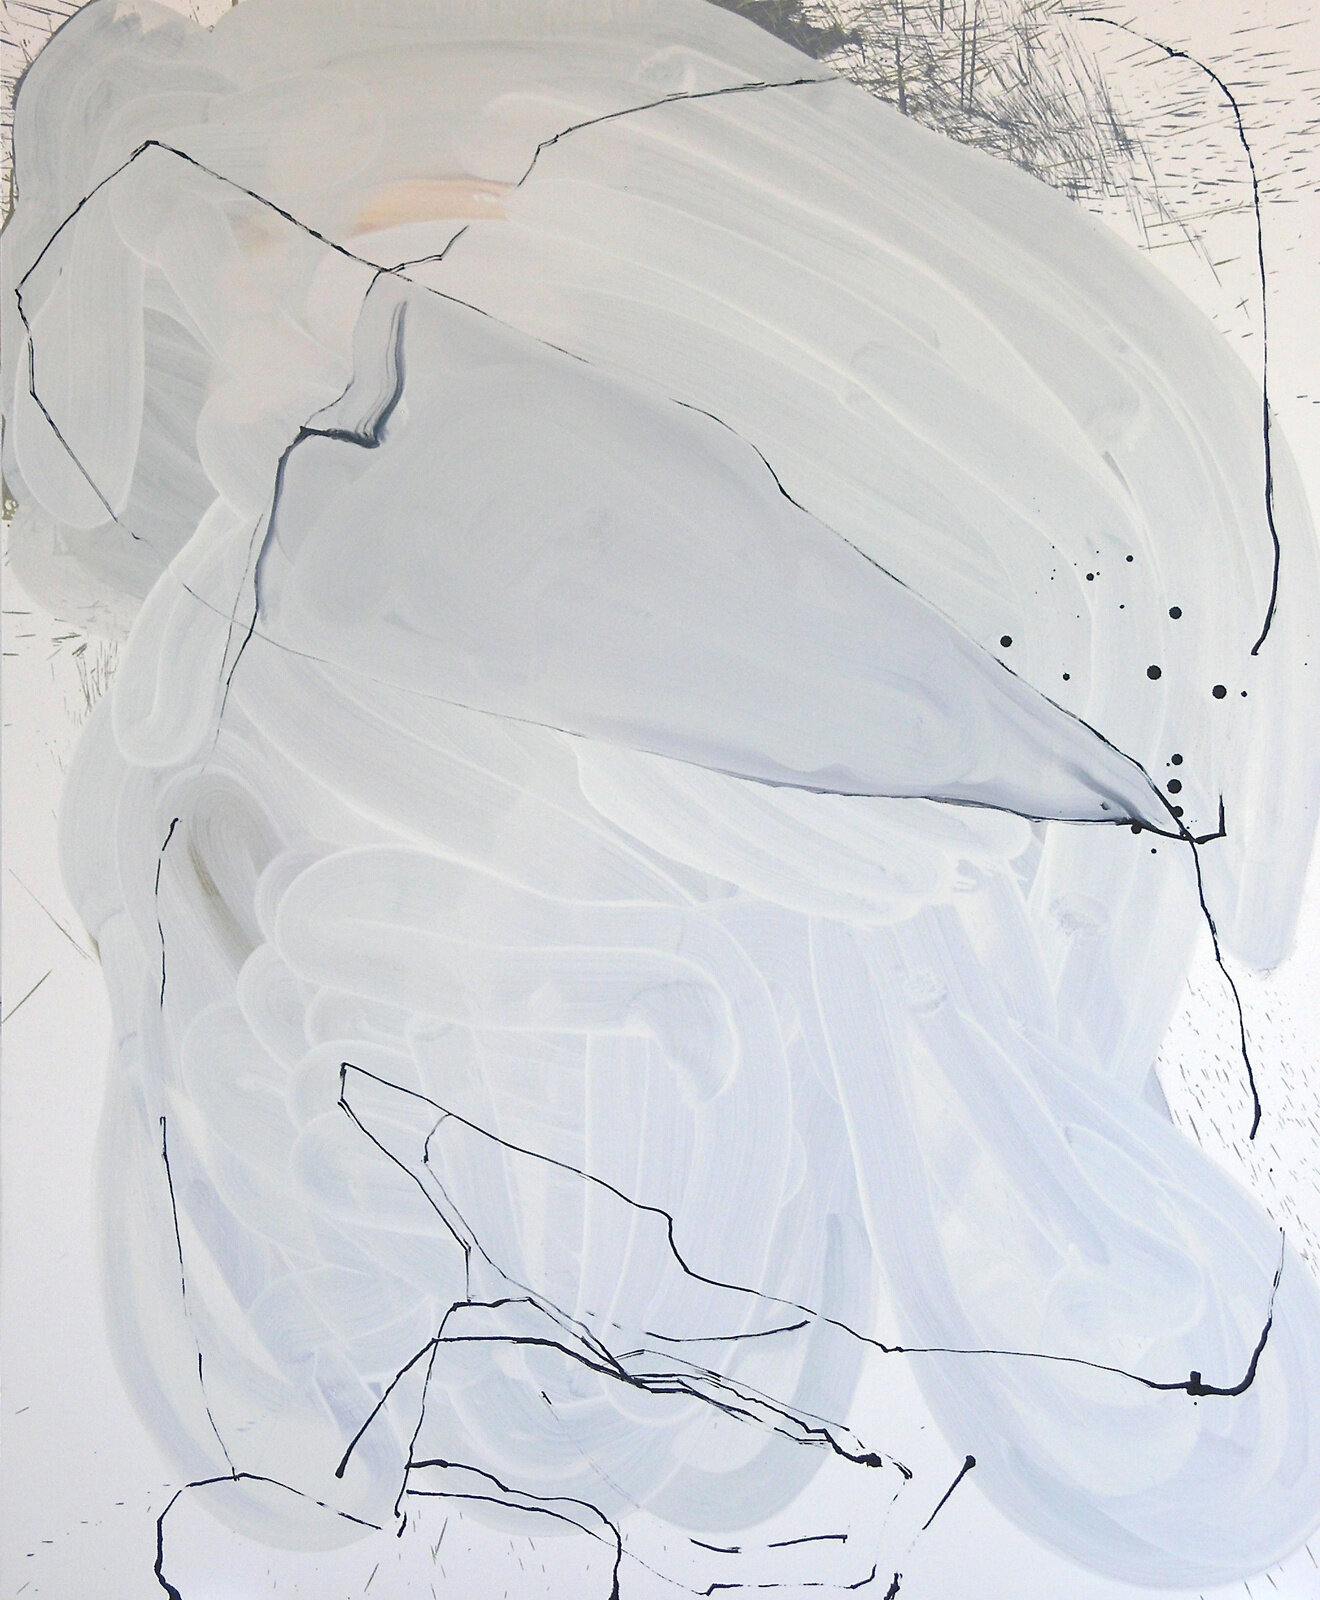 38d8be515a4d266b-ToddSchroeder_untitled1971_oiloncanvas_57x47inches_2012.jpg